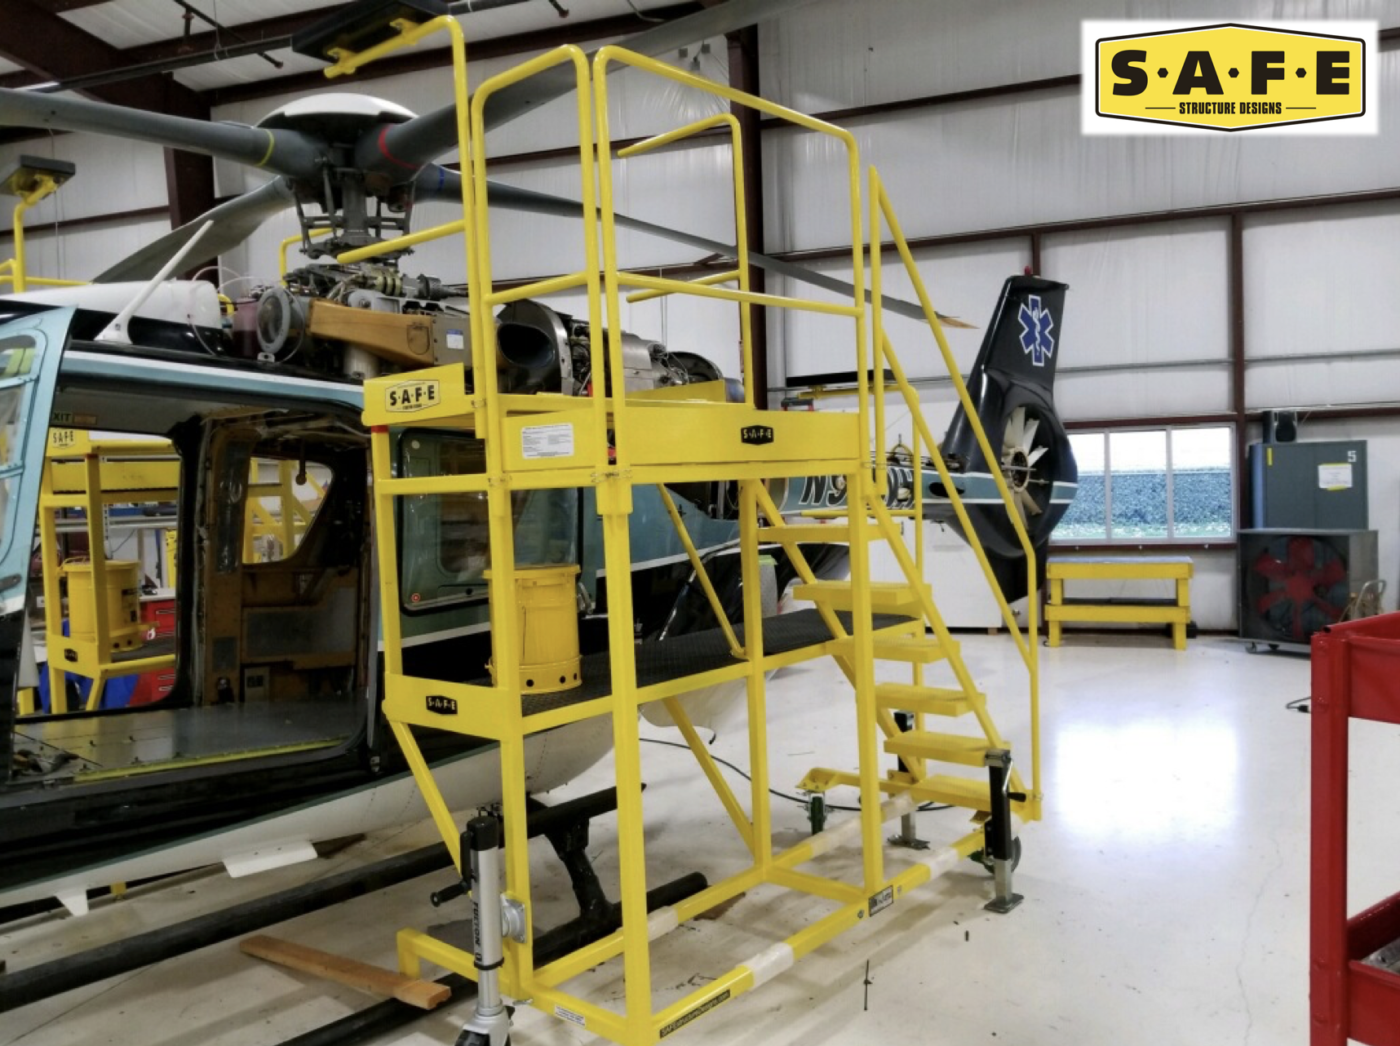 United Rotorcraft is the first of S.A.F.E.’s customers to receive maintenance stands with S.A.F.E.’s new innovative enhancements to increase the ergonomics and efficiency of the technician.